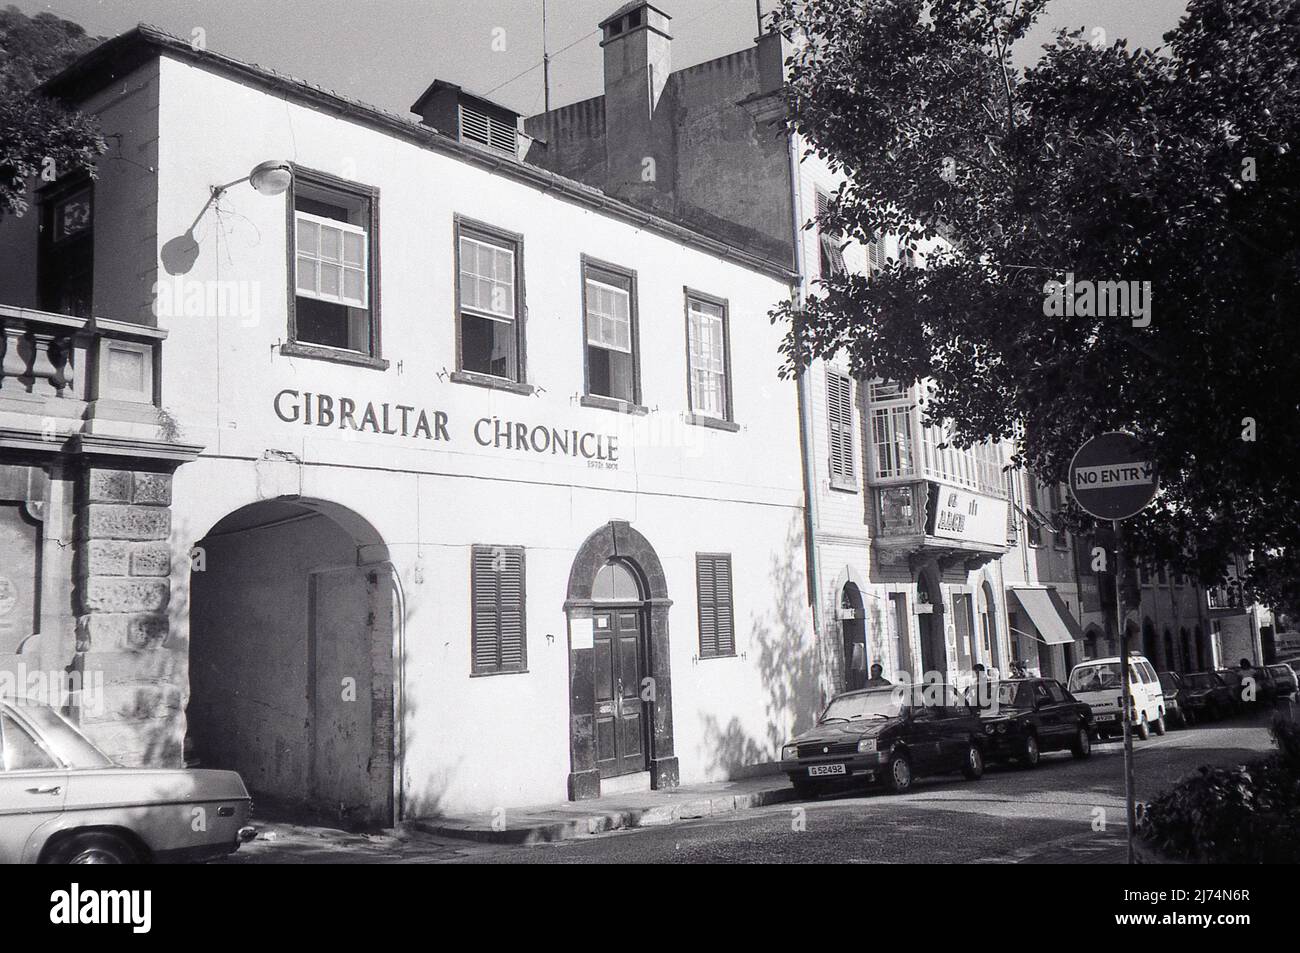 Watergate House, headquarters of the Gibraltar Chronicle on August 22, 1987. The English language daily newspaper was first published in 1801. Stock Photo